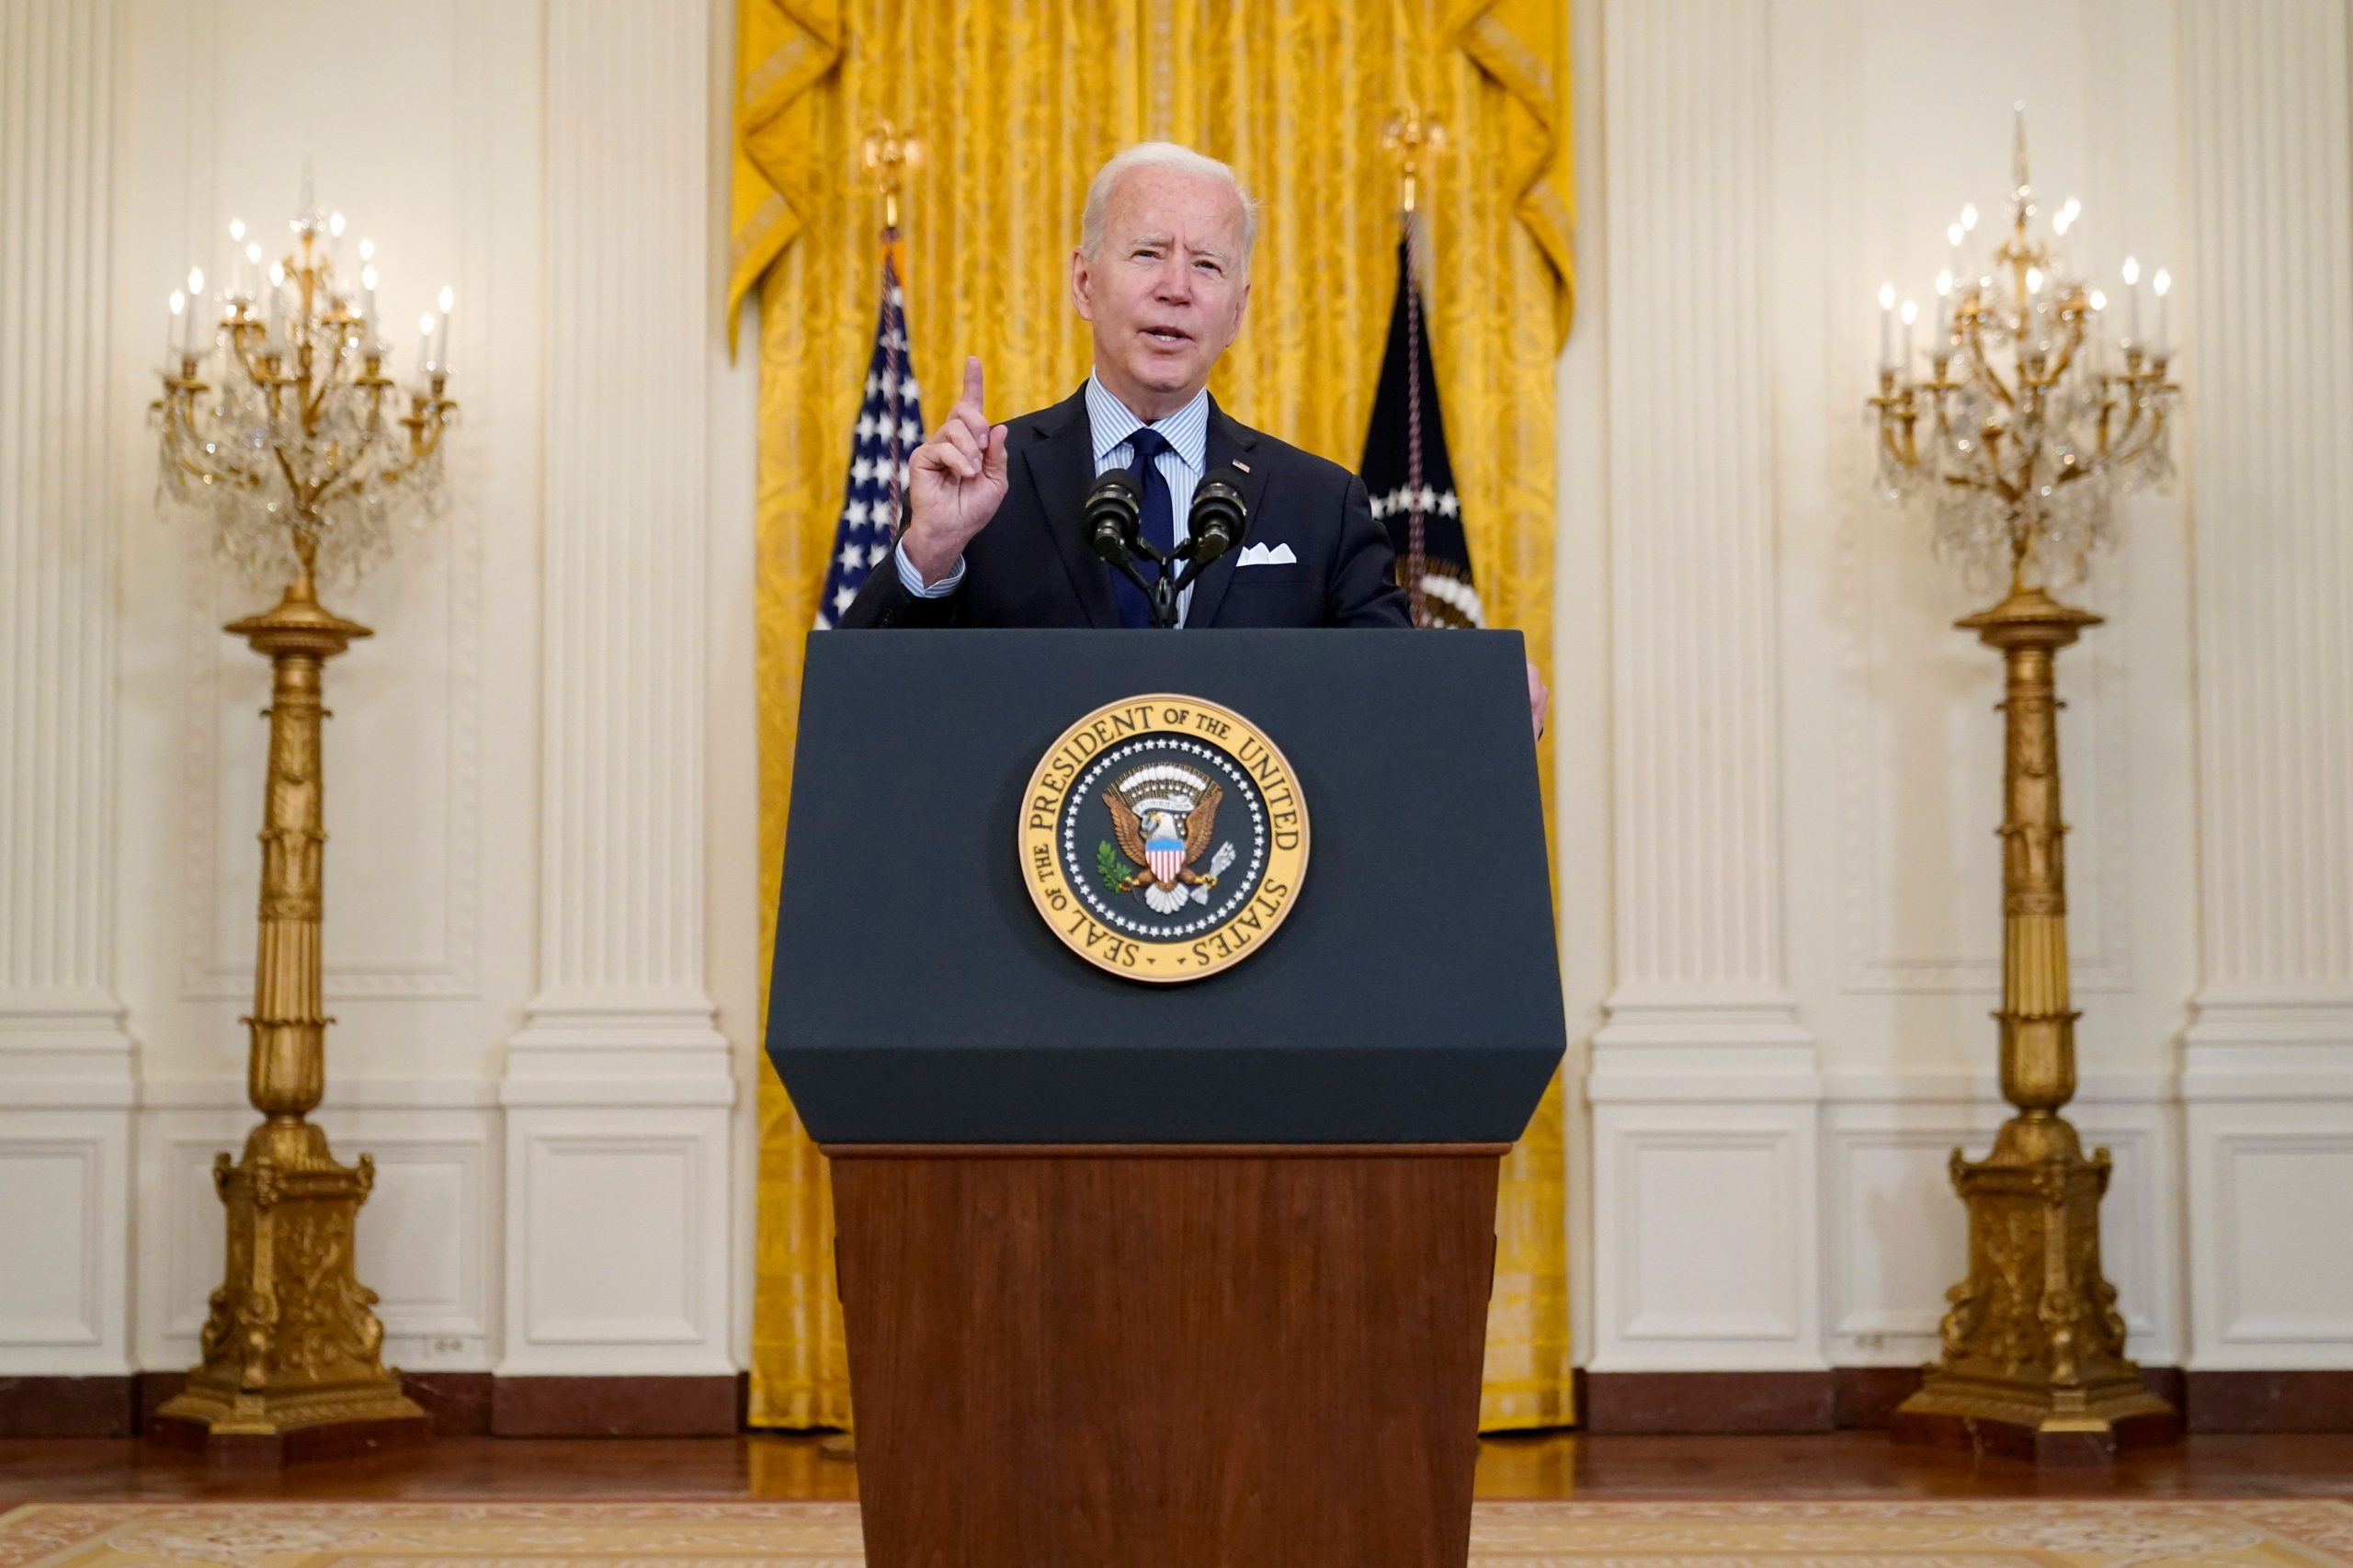 Assault on freedom of press: Biden lashes out at Belarus forced plane landing